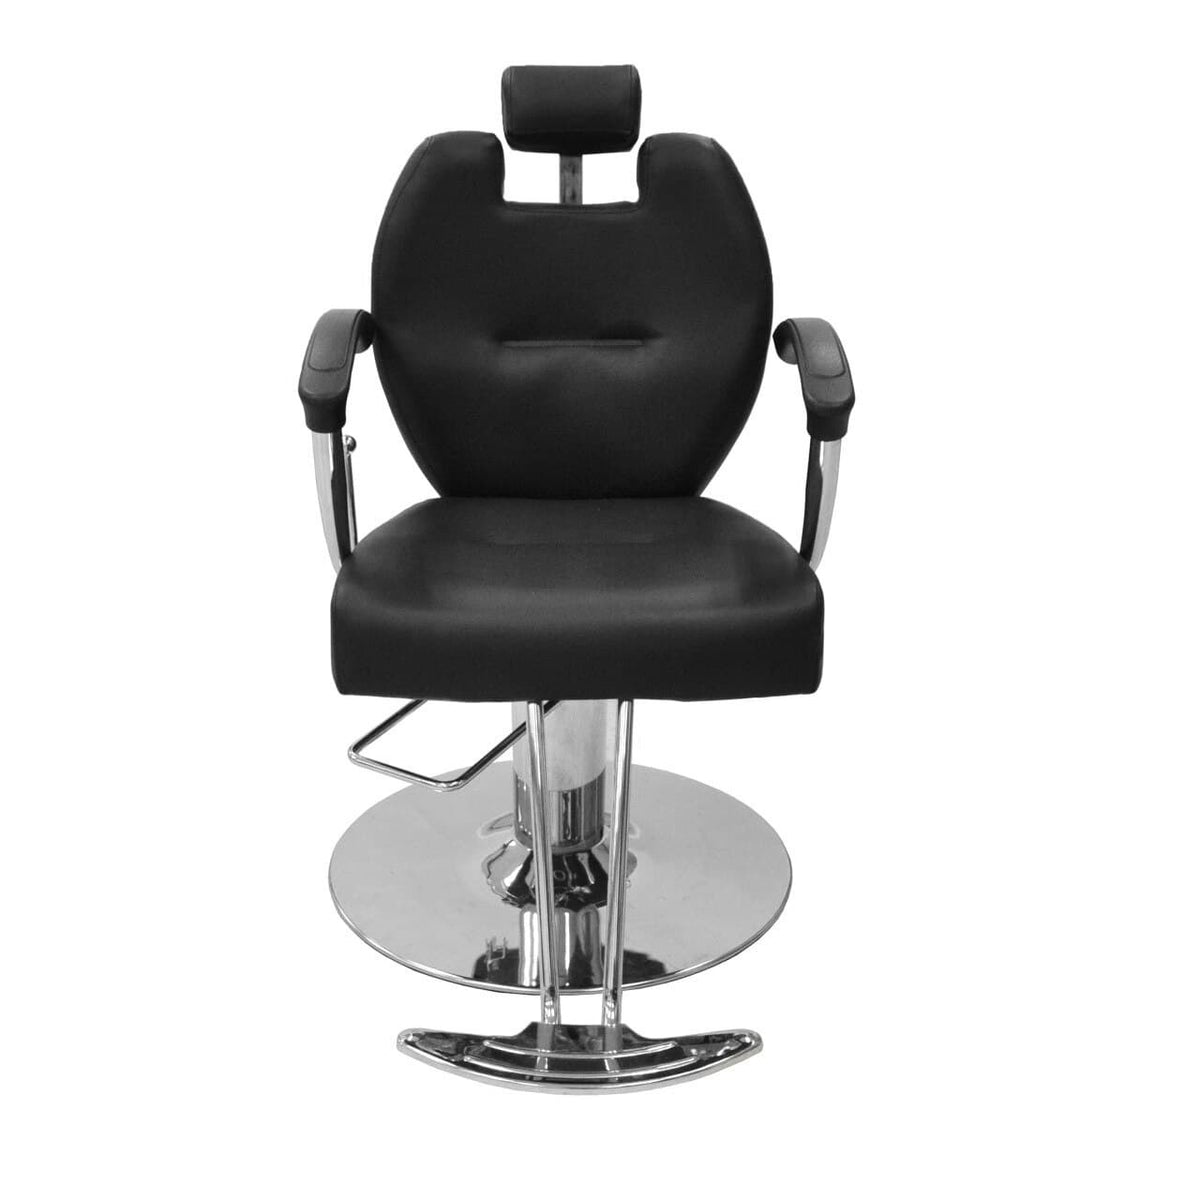 Berkeley Berkeley Herman Styling Chair Styling Chair - ChairsThatGive